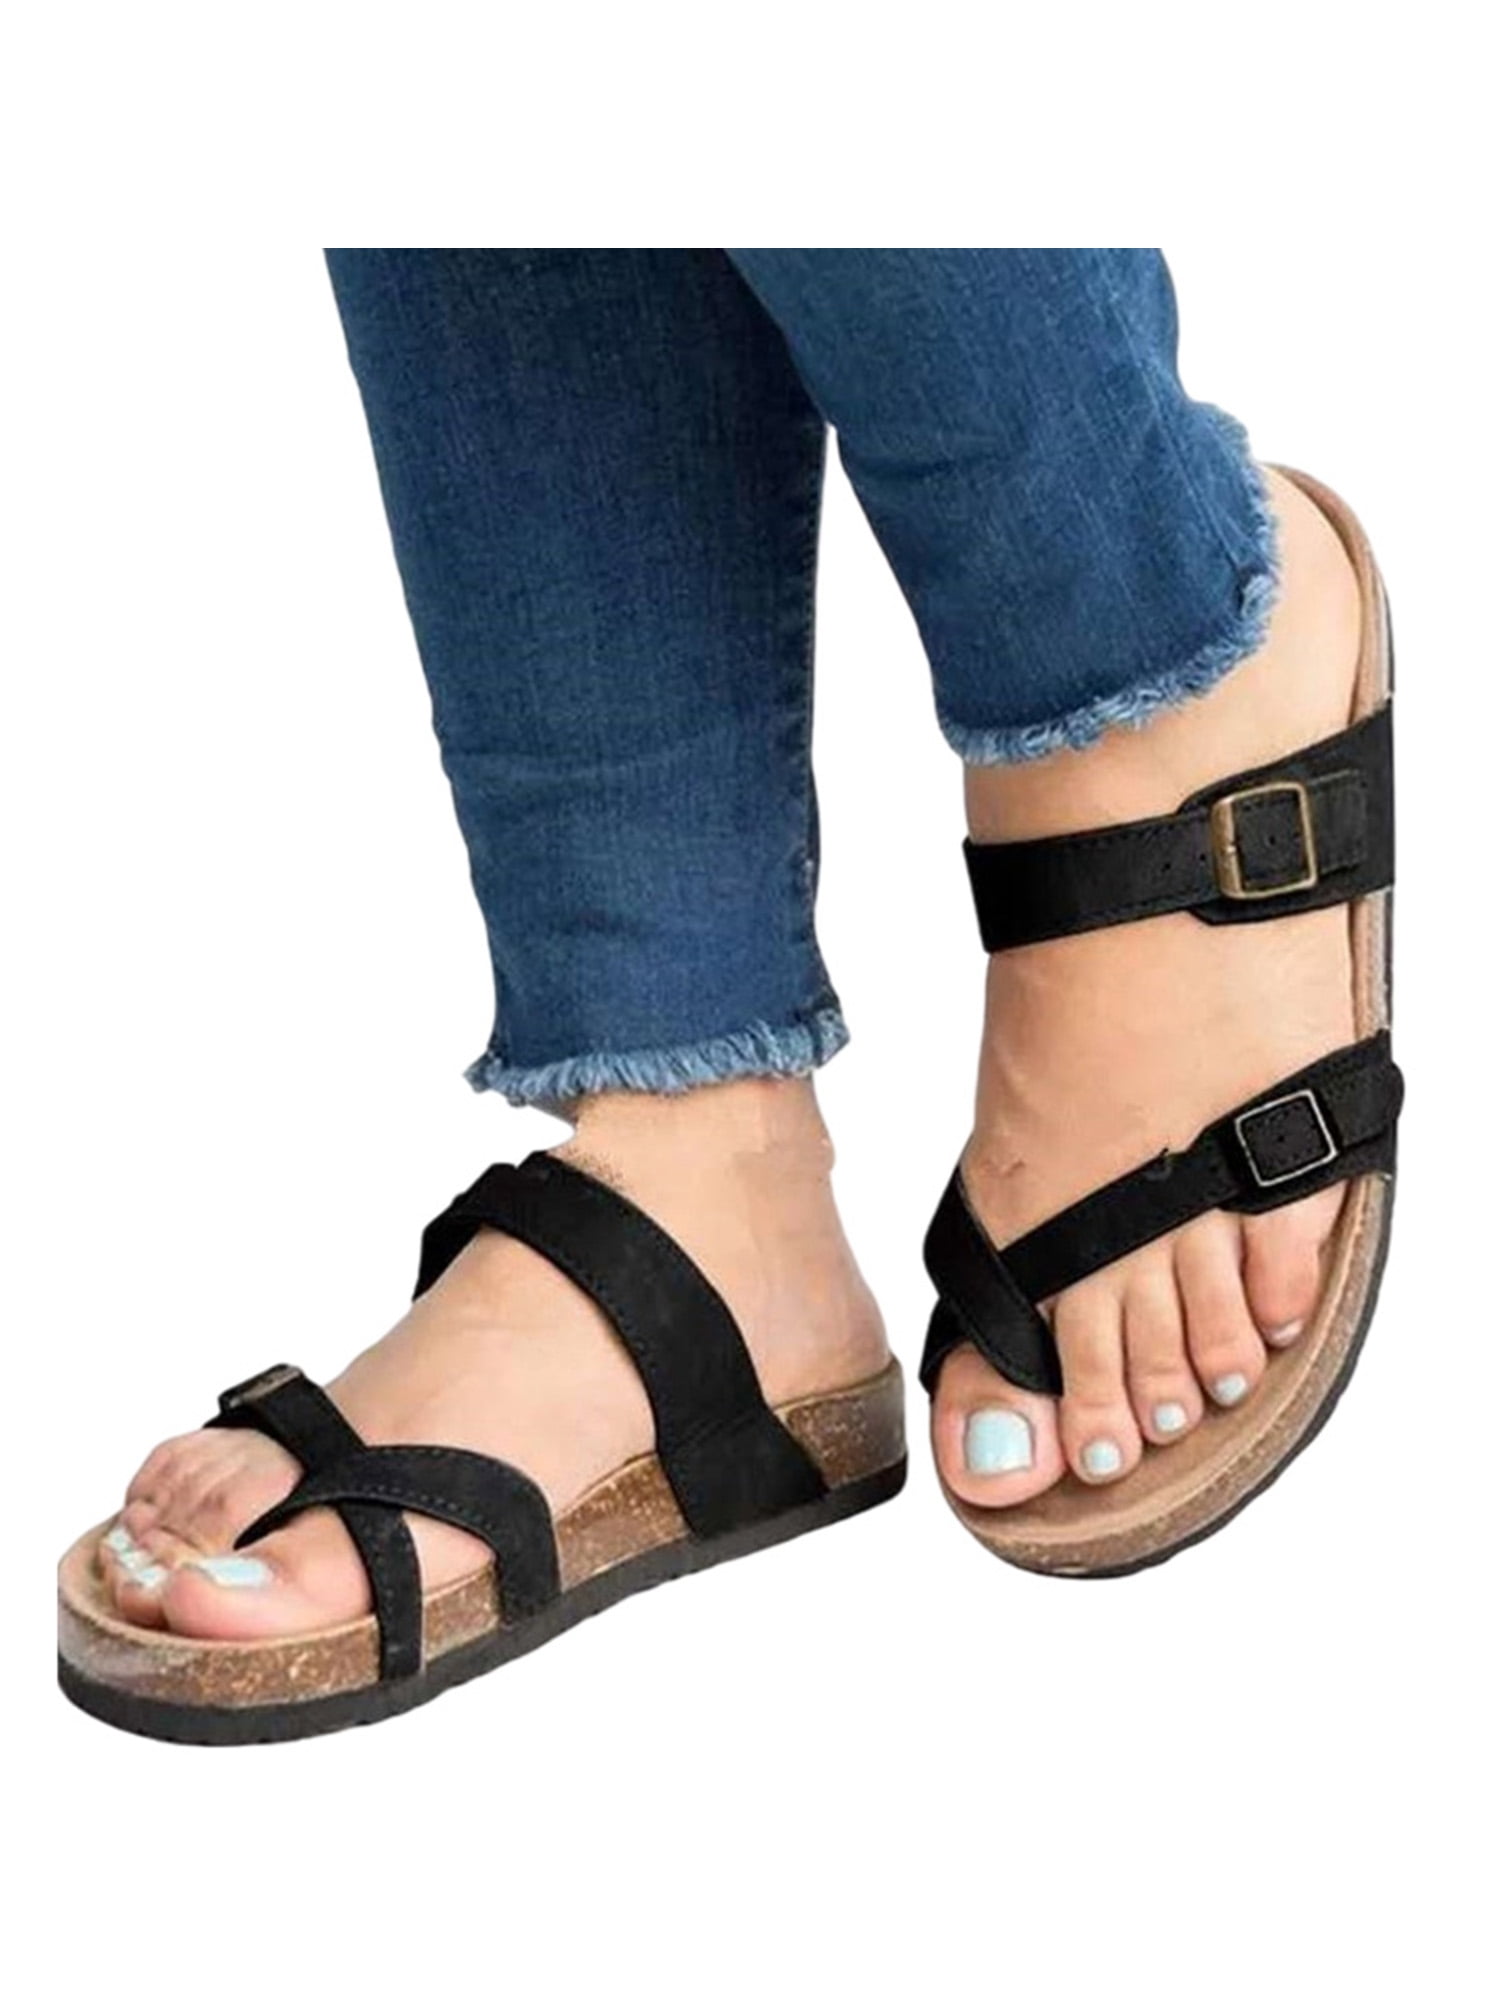 9 Sandals with Arch Support: Pros, Cons, and More